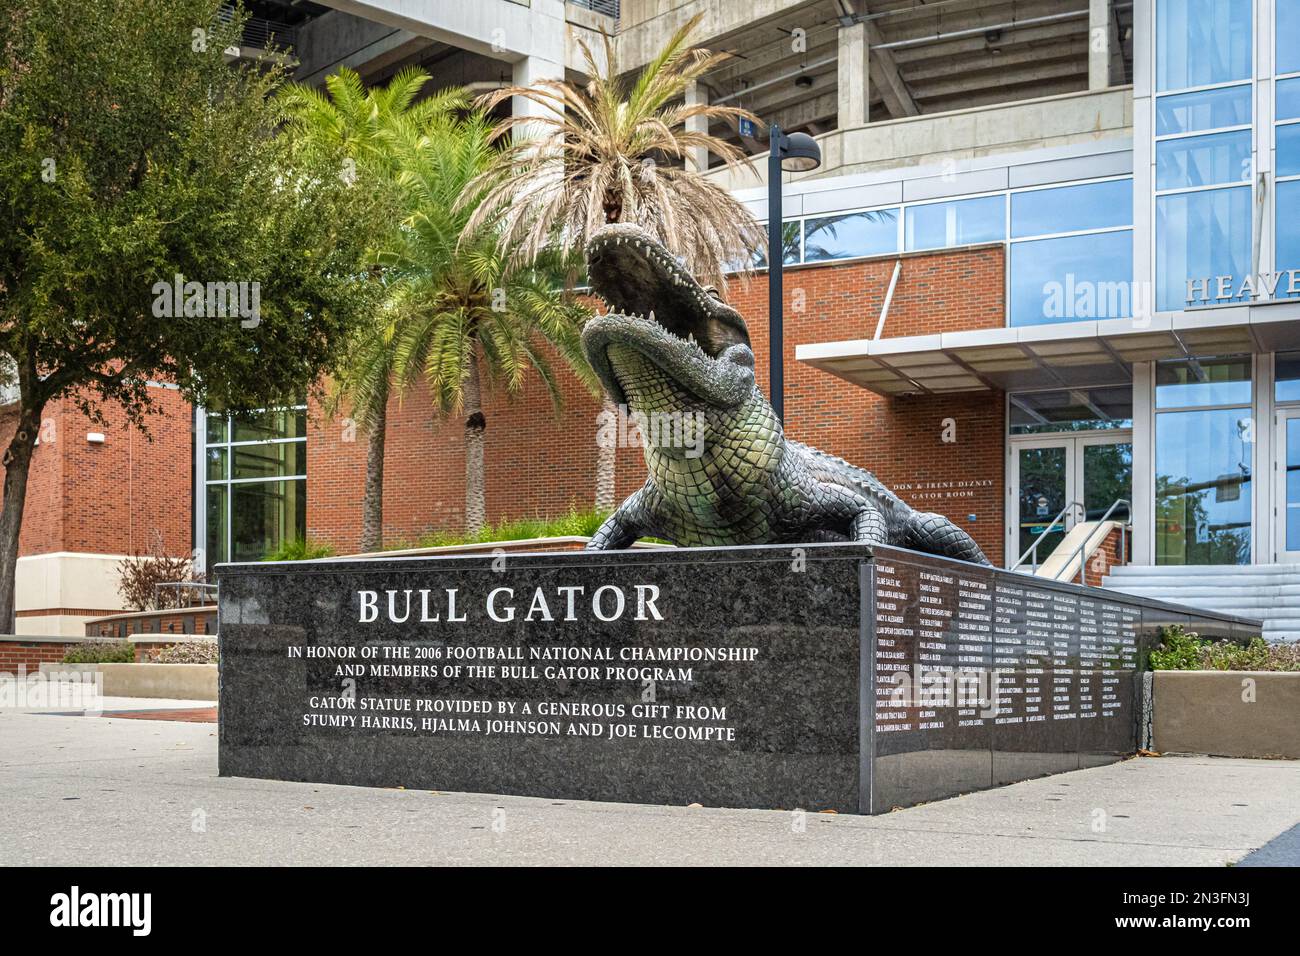 Bull Gator bronze statue at Ben Hill Griffin Stadium in Gainesville, Florida, honoring the Gators' victory in the 2006 National Football Championship. Stock Photo